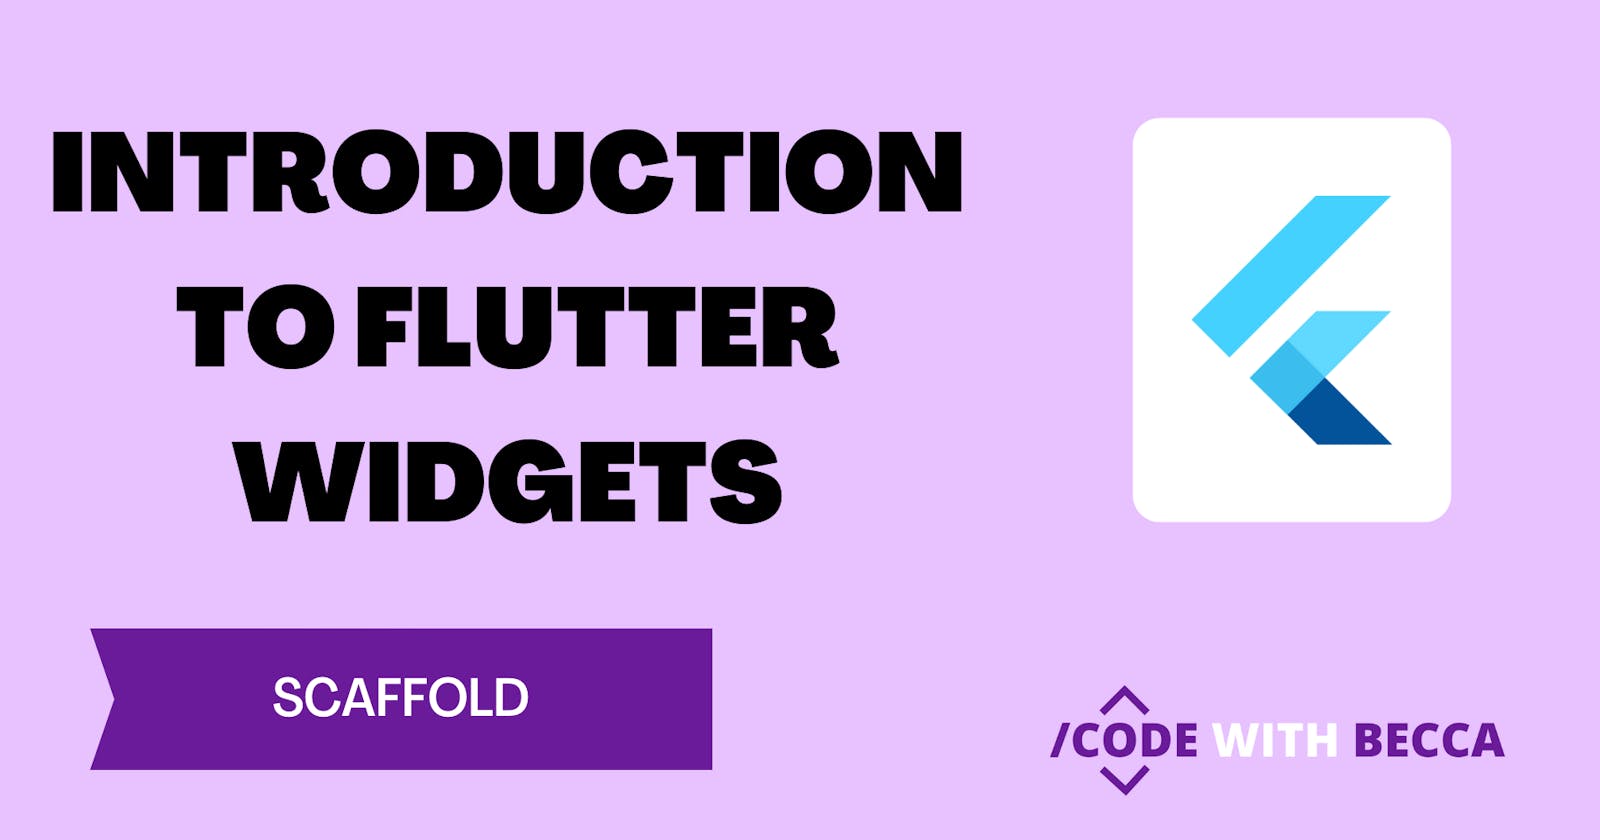 Introduction to Flutter Widgets: Scaffold and its properties